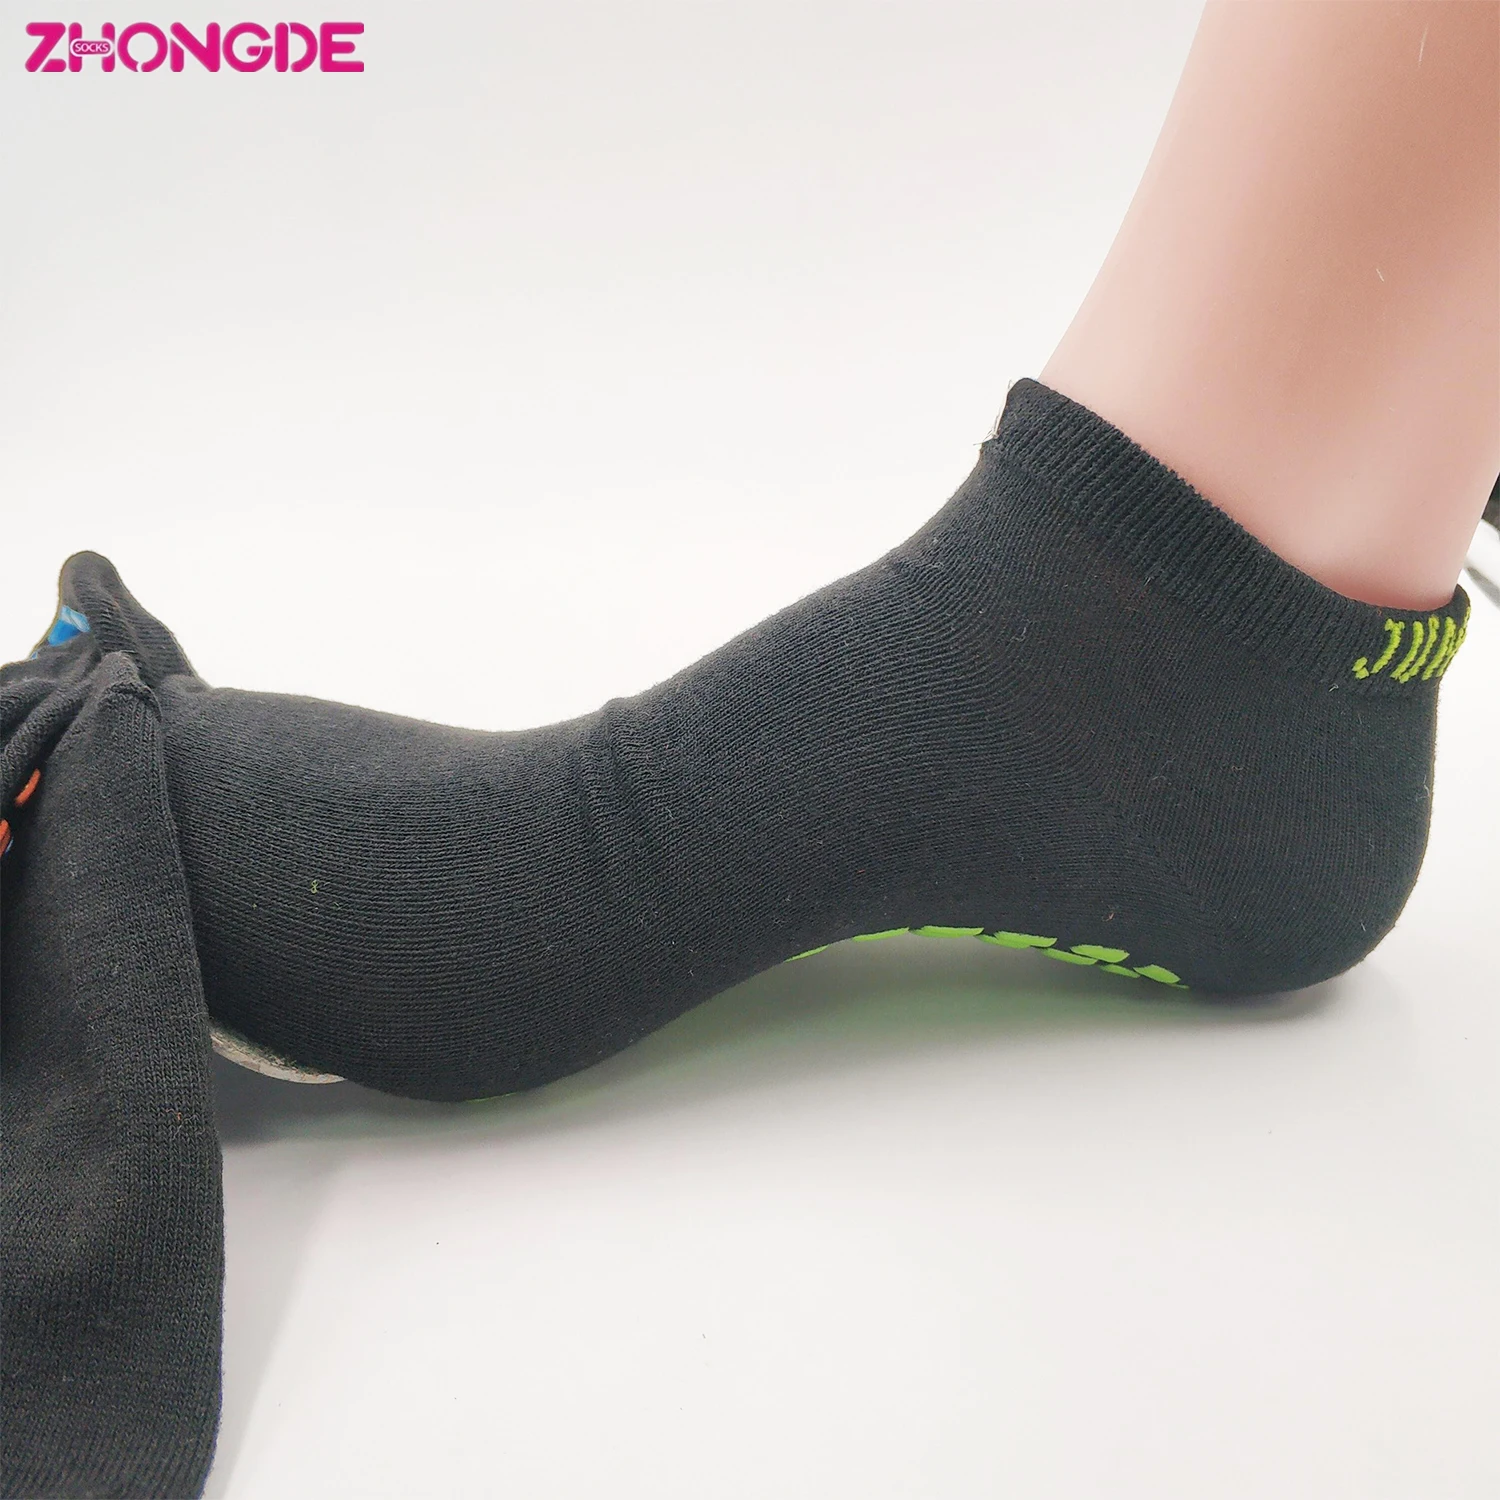 socks with rubber grips